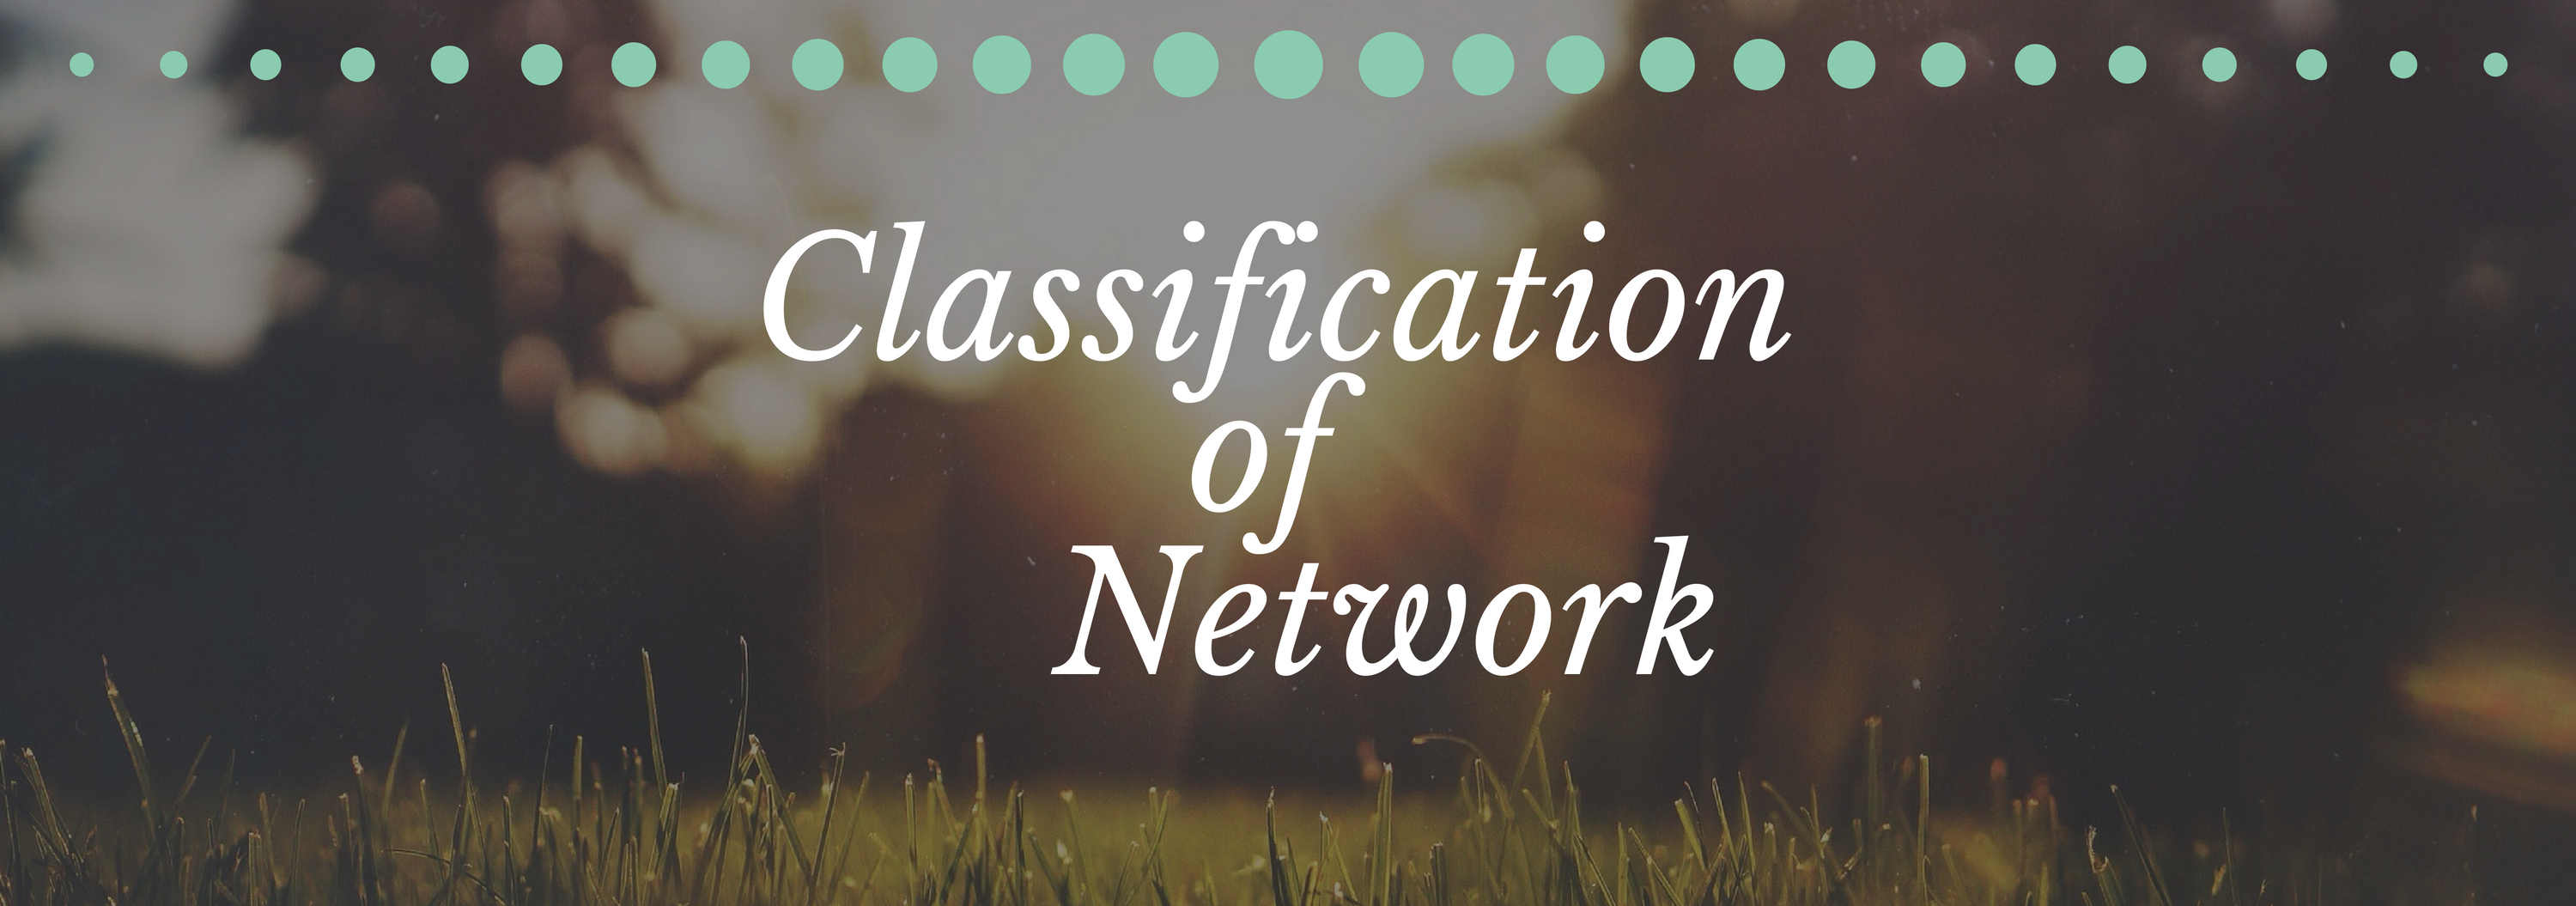 Classification of Network